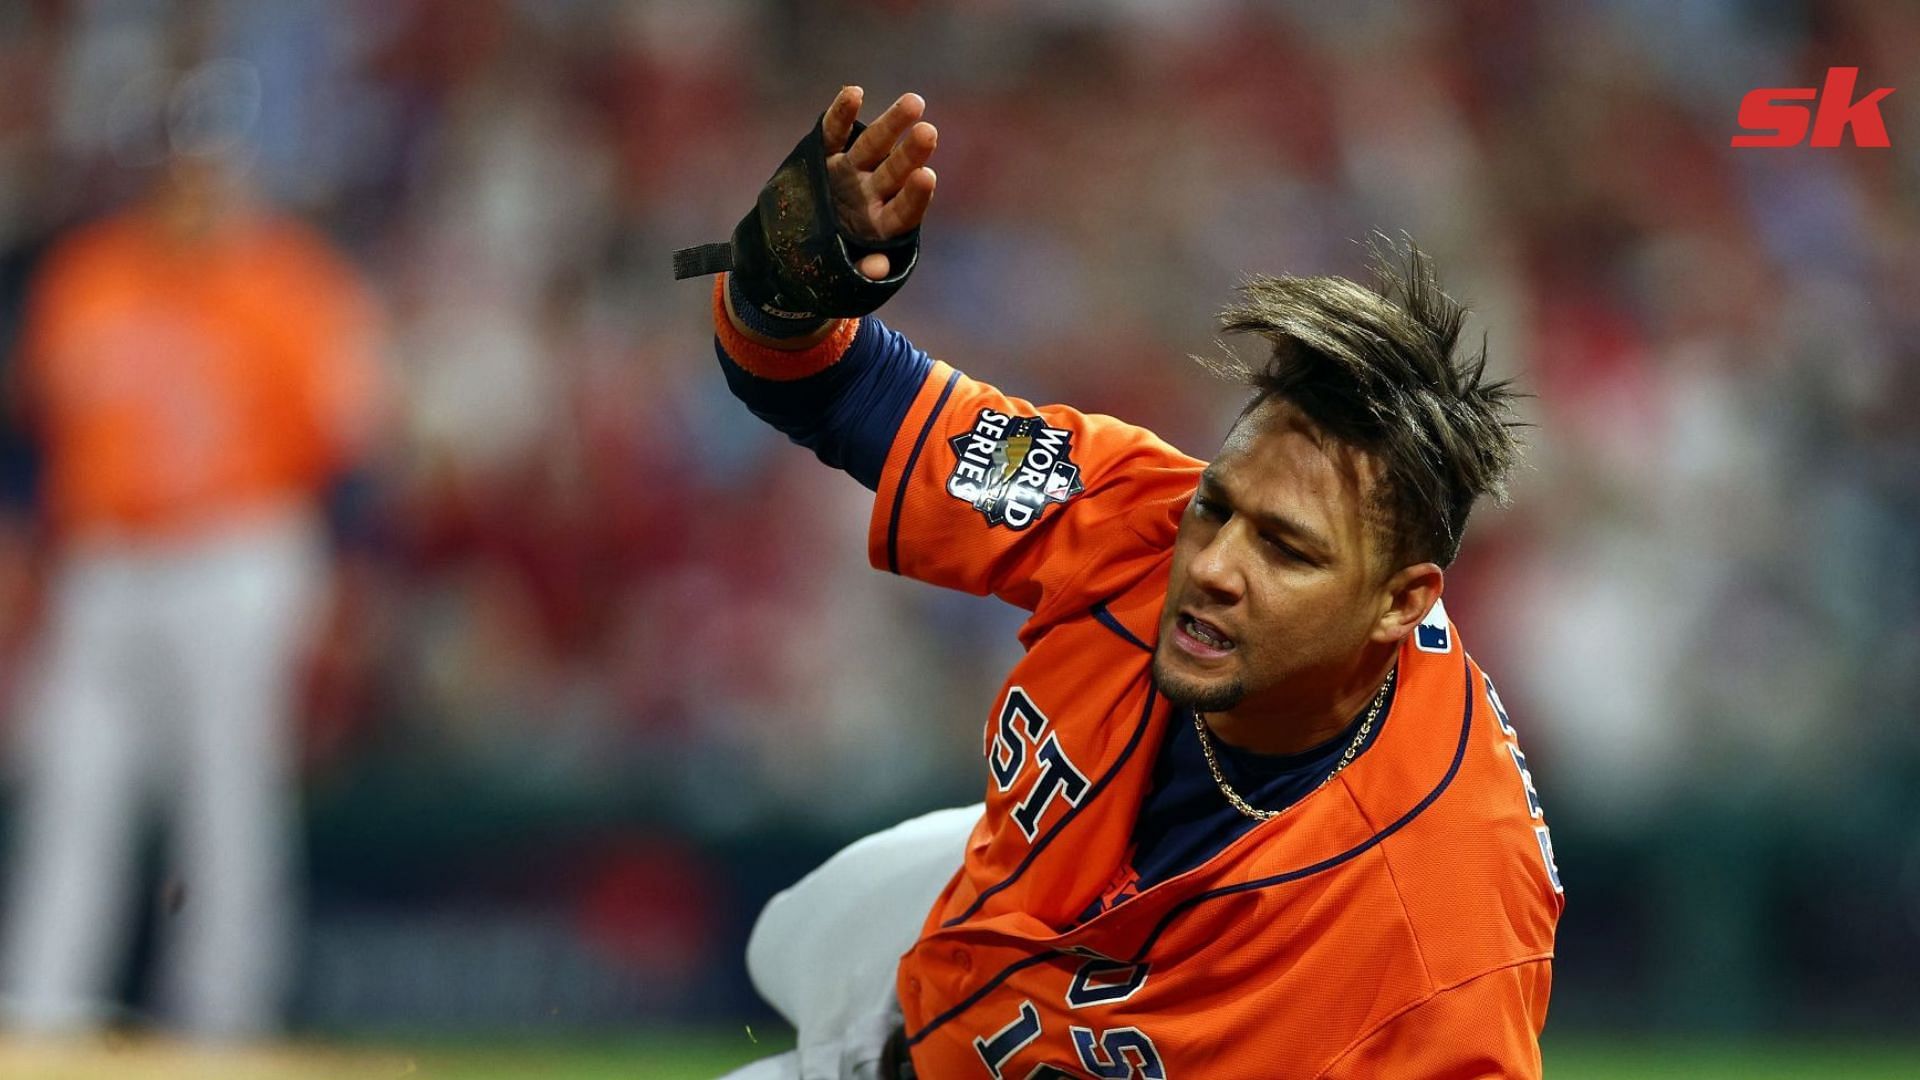 Yuli Gurriel of the Houston Astros celebrates after hitting a